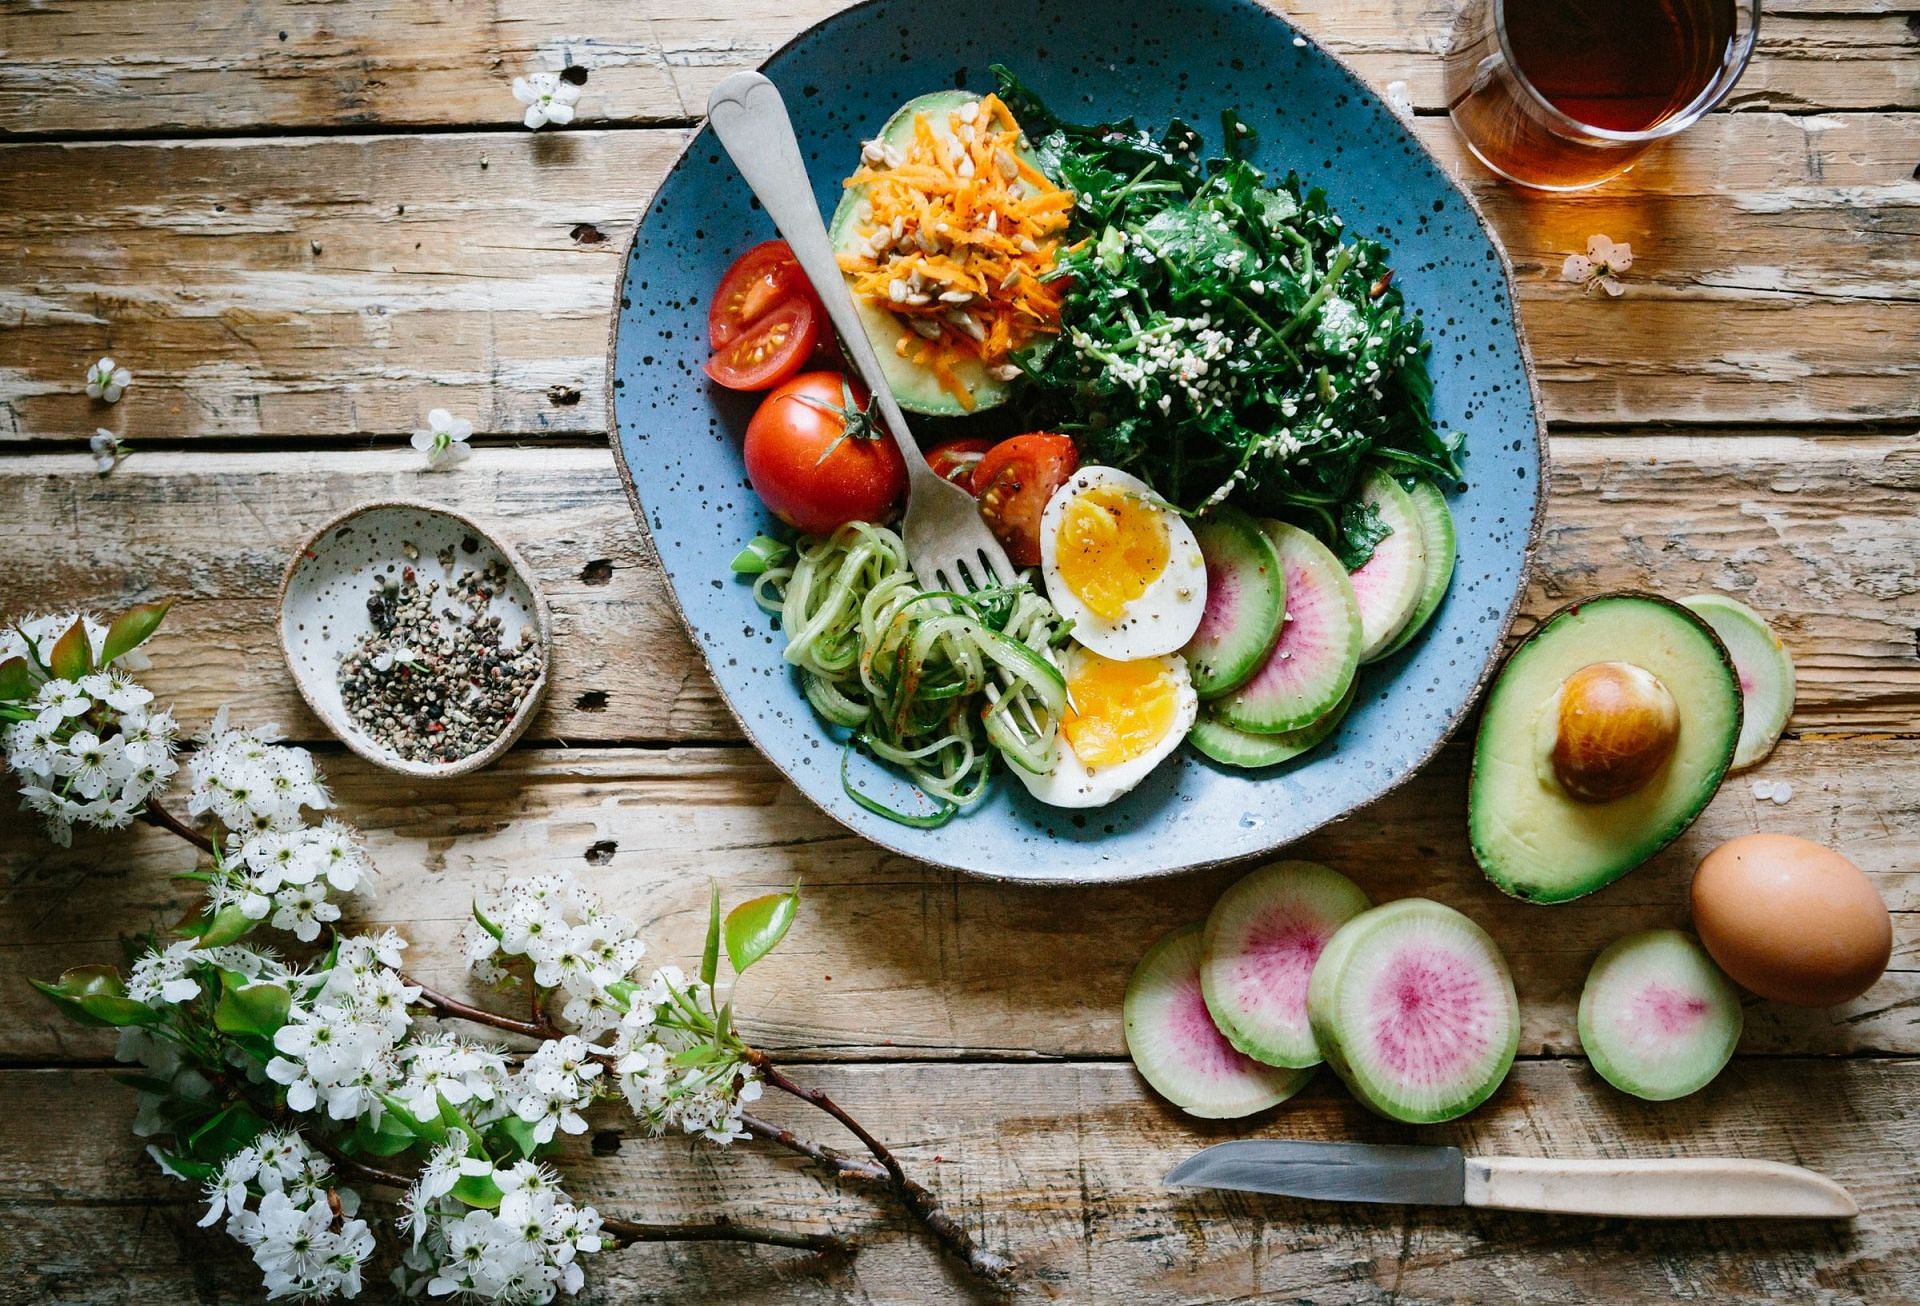 Healthy foods are a key to an effective weight training routine. (Photo by Brooke Lark on Unsplash)